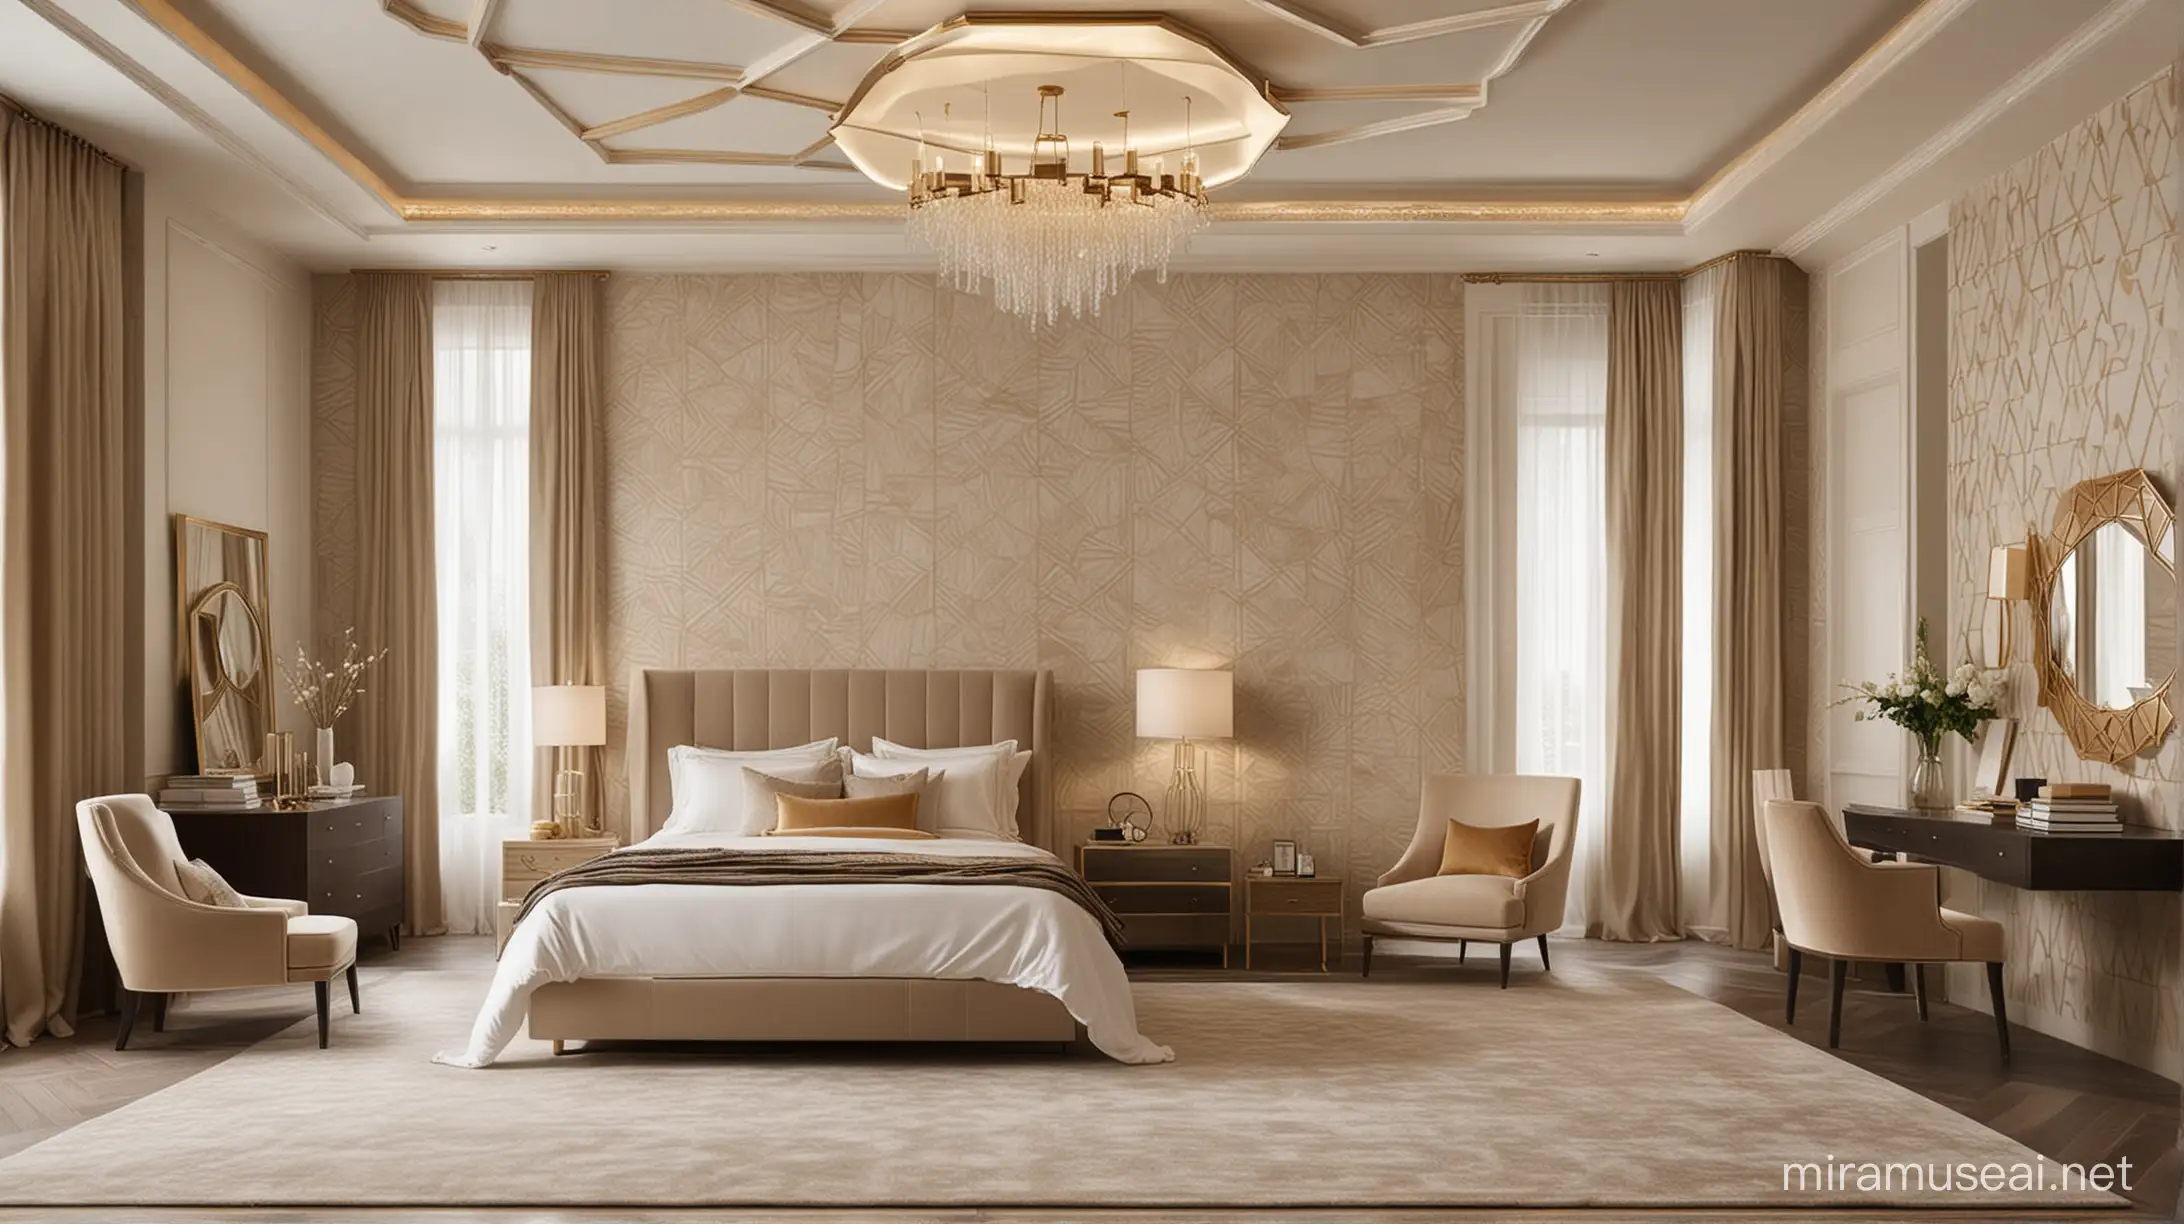 Sophisticated Modern Bedroom Transformation Subtle Geometric Patterns and Golden Accents